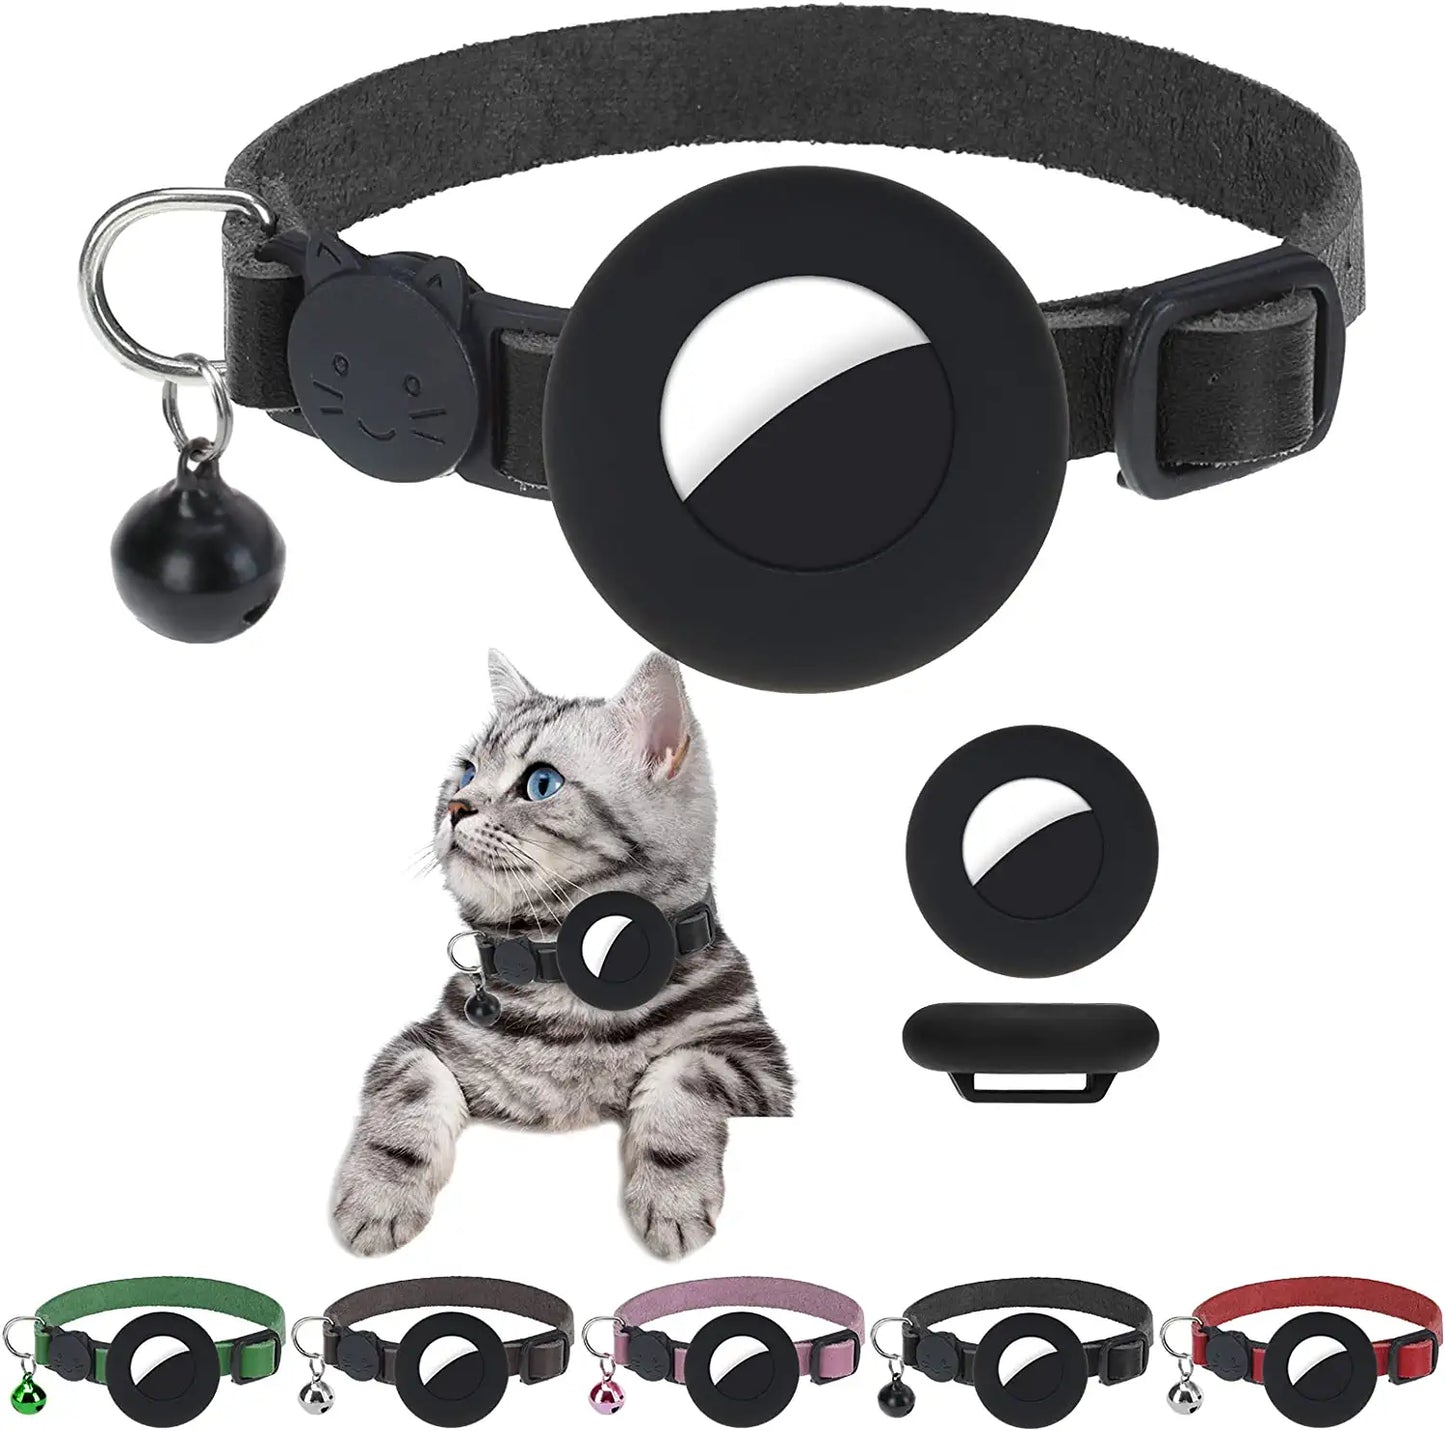 DILLYBUD Airtag Cat Collar Holder 2 Pack Reflective Air Tag Cat Collars Breakaway with Bell, Silicone Waterproof Airtag Case Compatible with Apple Airtag for Small Pets Puppy Kitten Electronics > GPS Accessories > GPS Cases DILLYBUD Solid Black Leather 